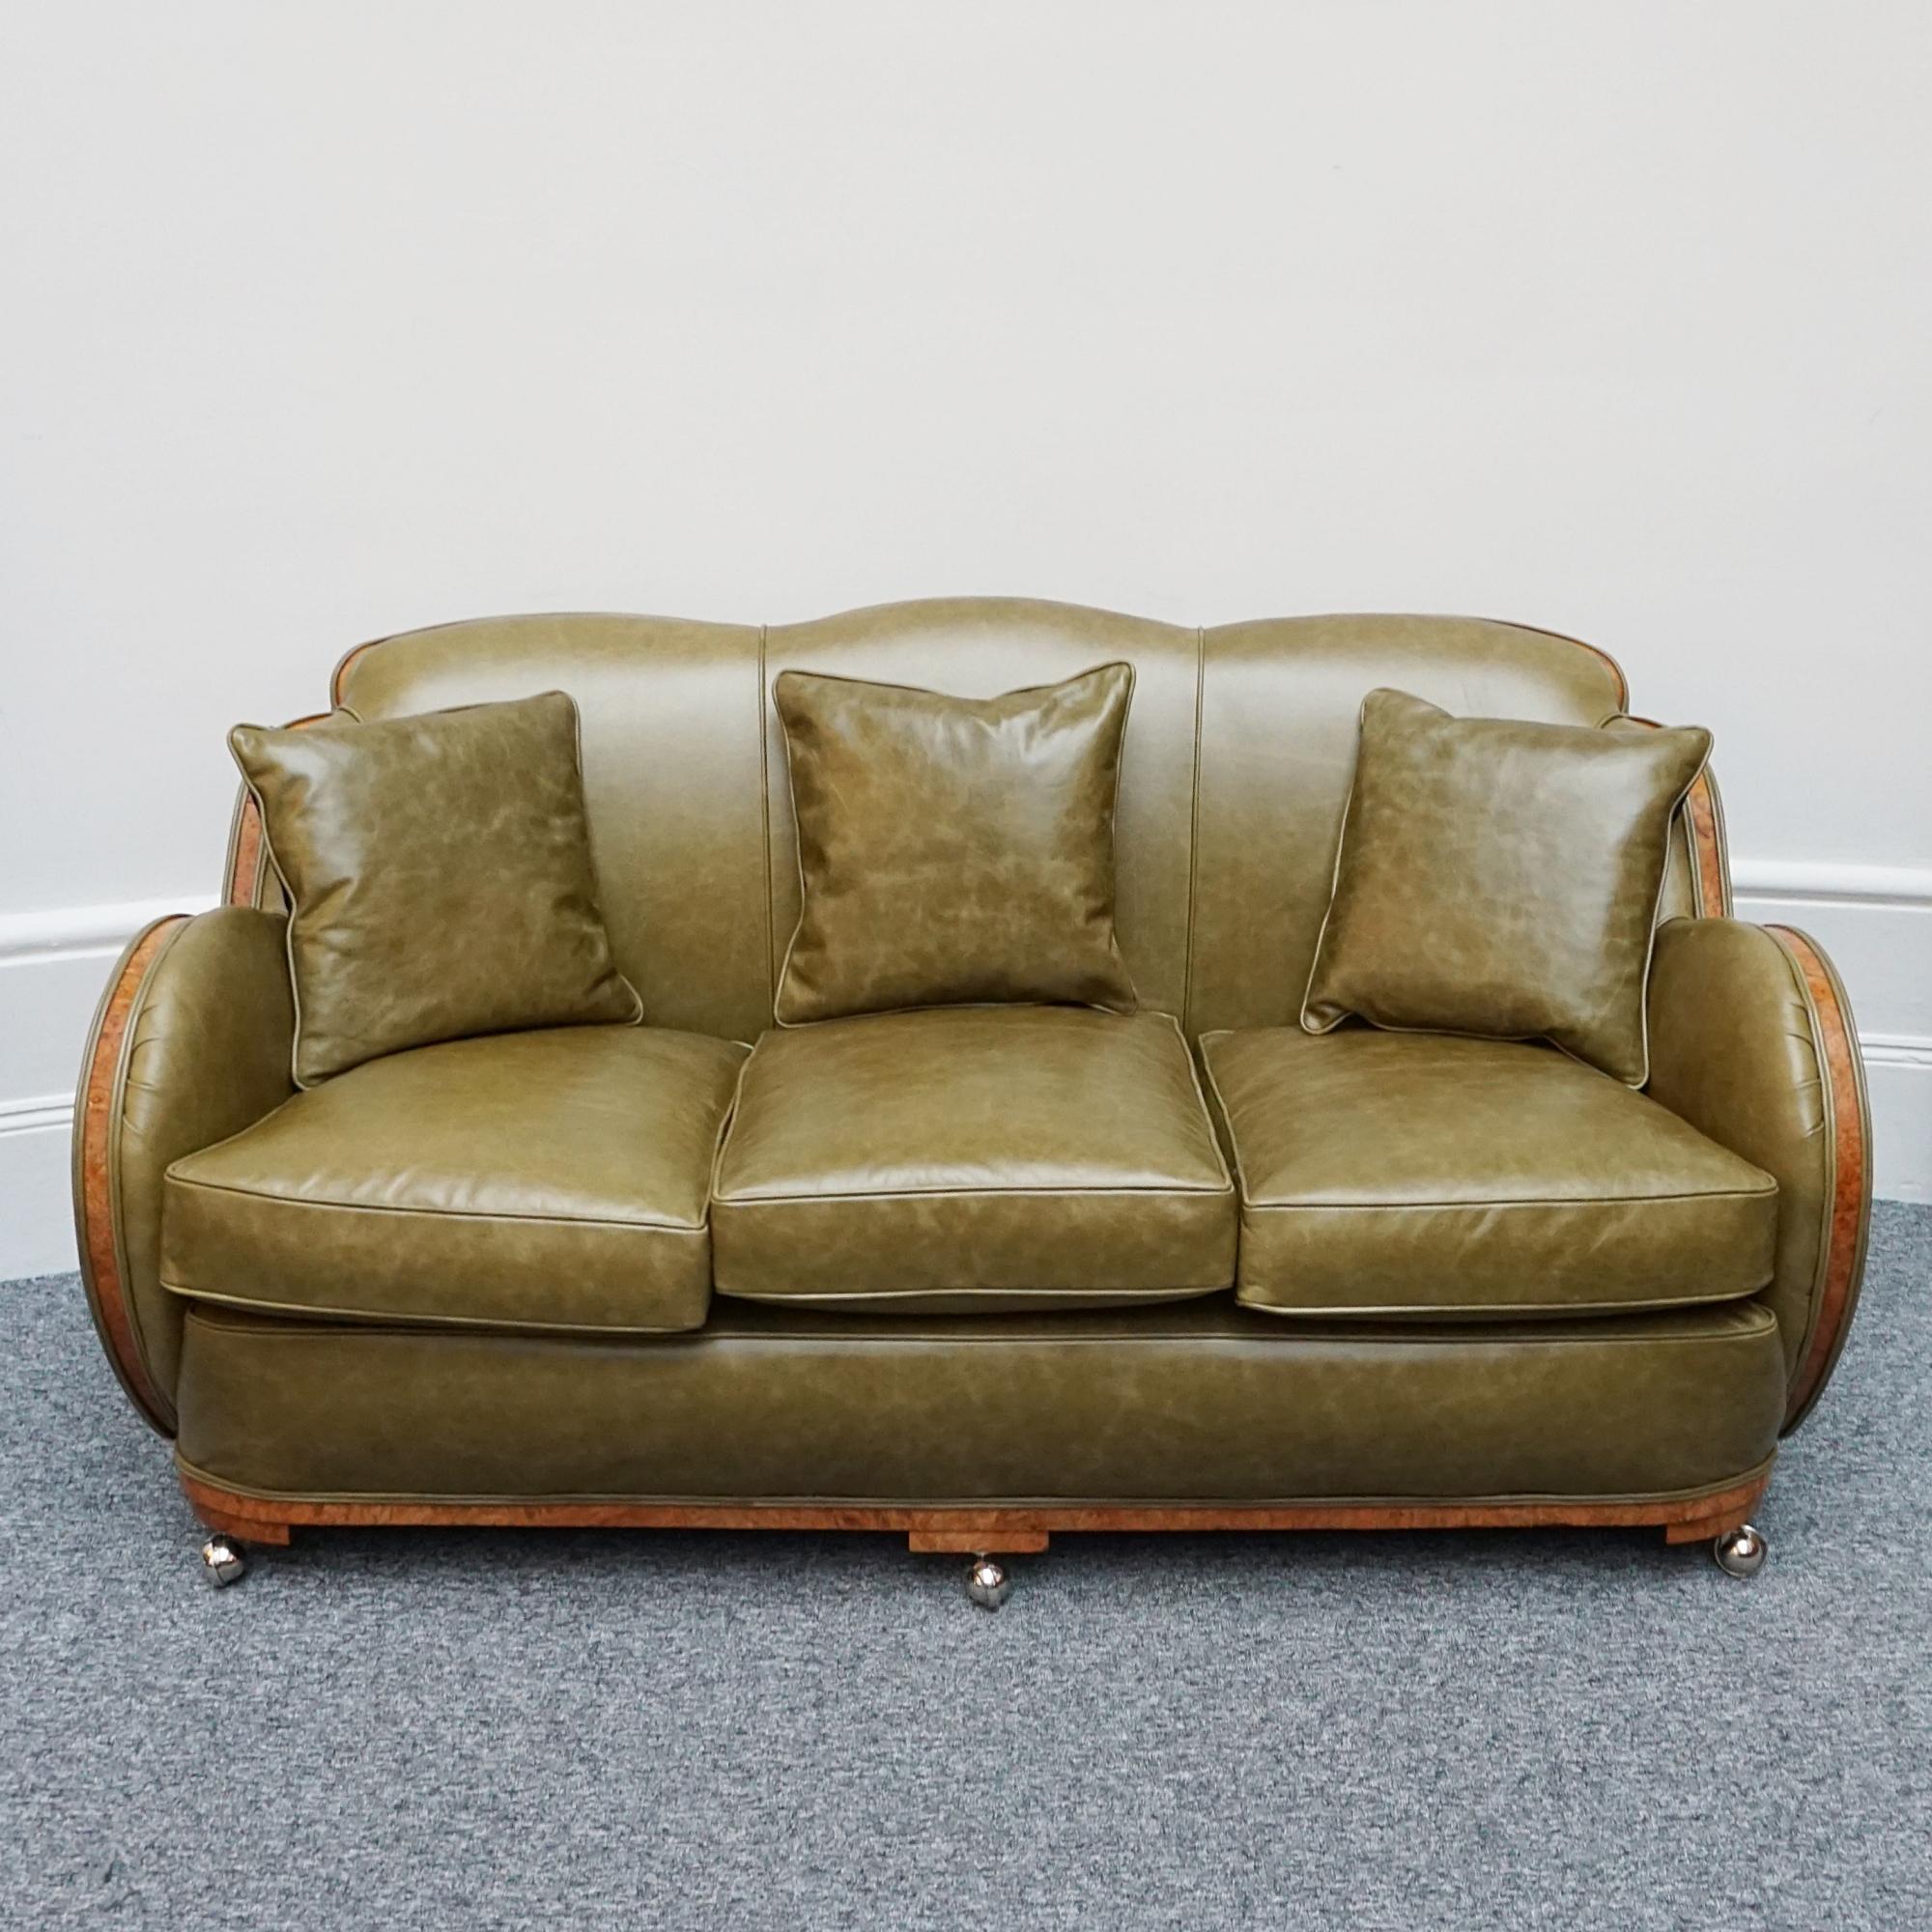 An Art Deco 'Cloud' Sofa by Harry & Lou Epstein. Three seater cloud back sofa with burr walnut show wood banding that runs throughout. Re-upholstered in olive green leather. 

Designer: Harry & Lou Epstein

Dimensions: H 77cm W 163cm D 80cm Seat H